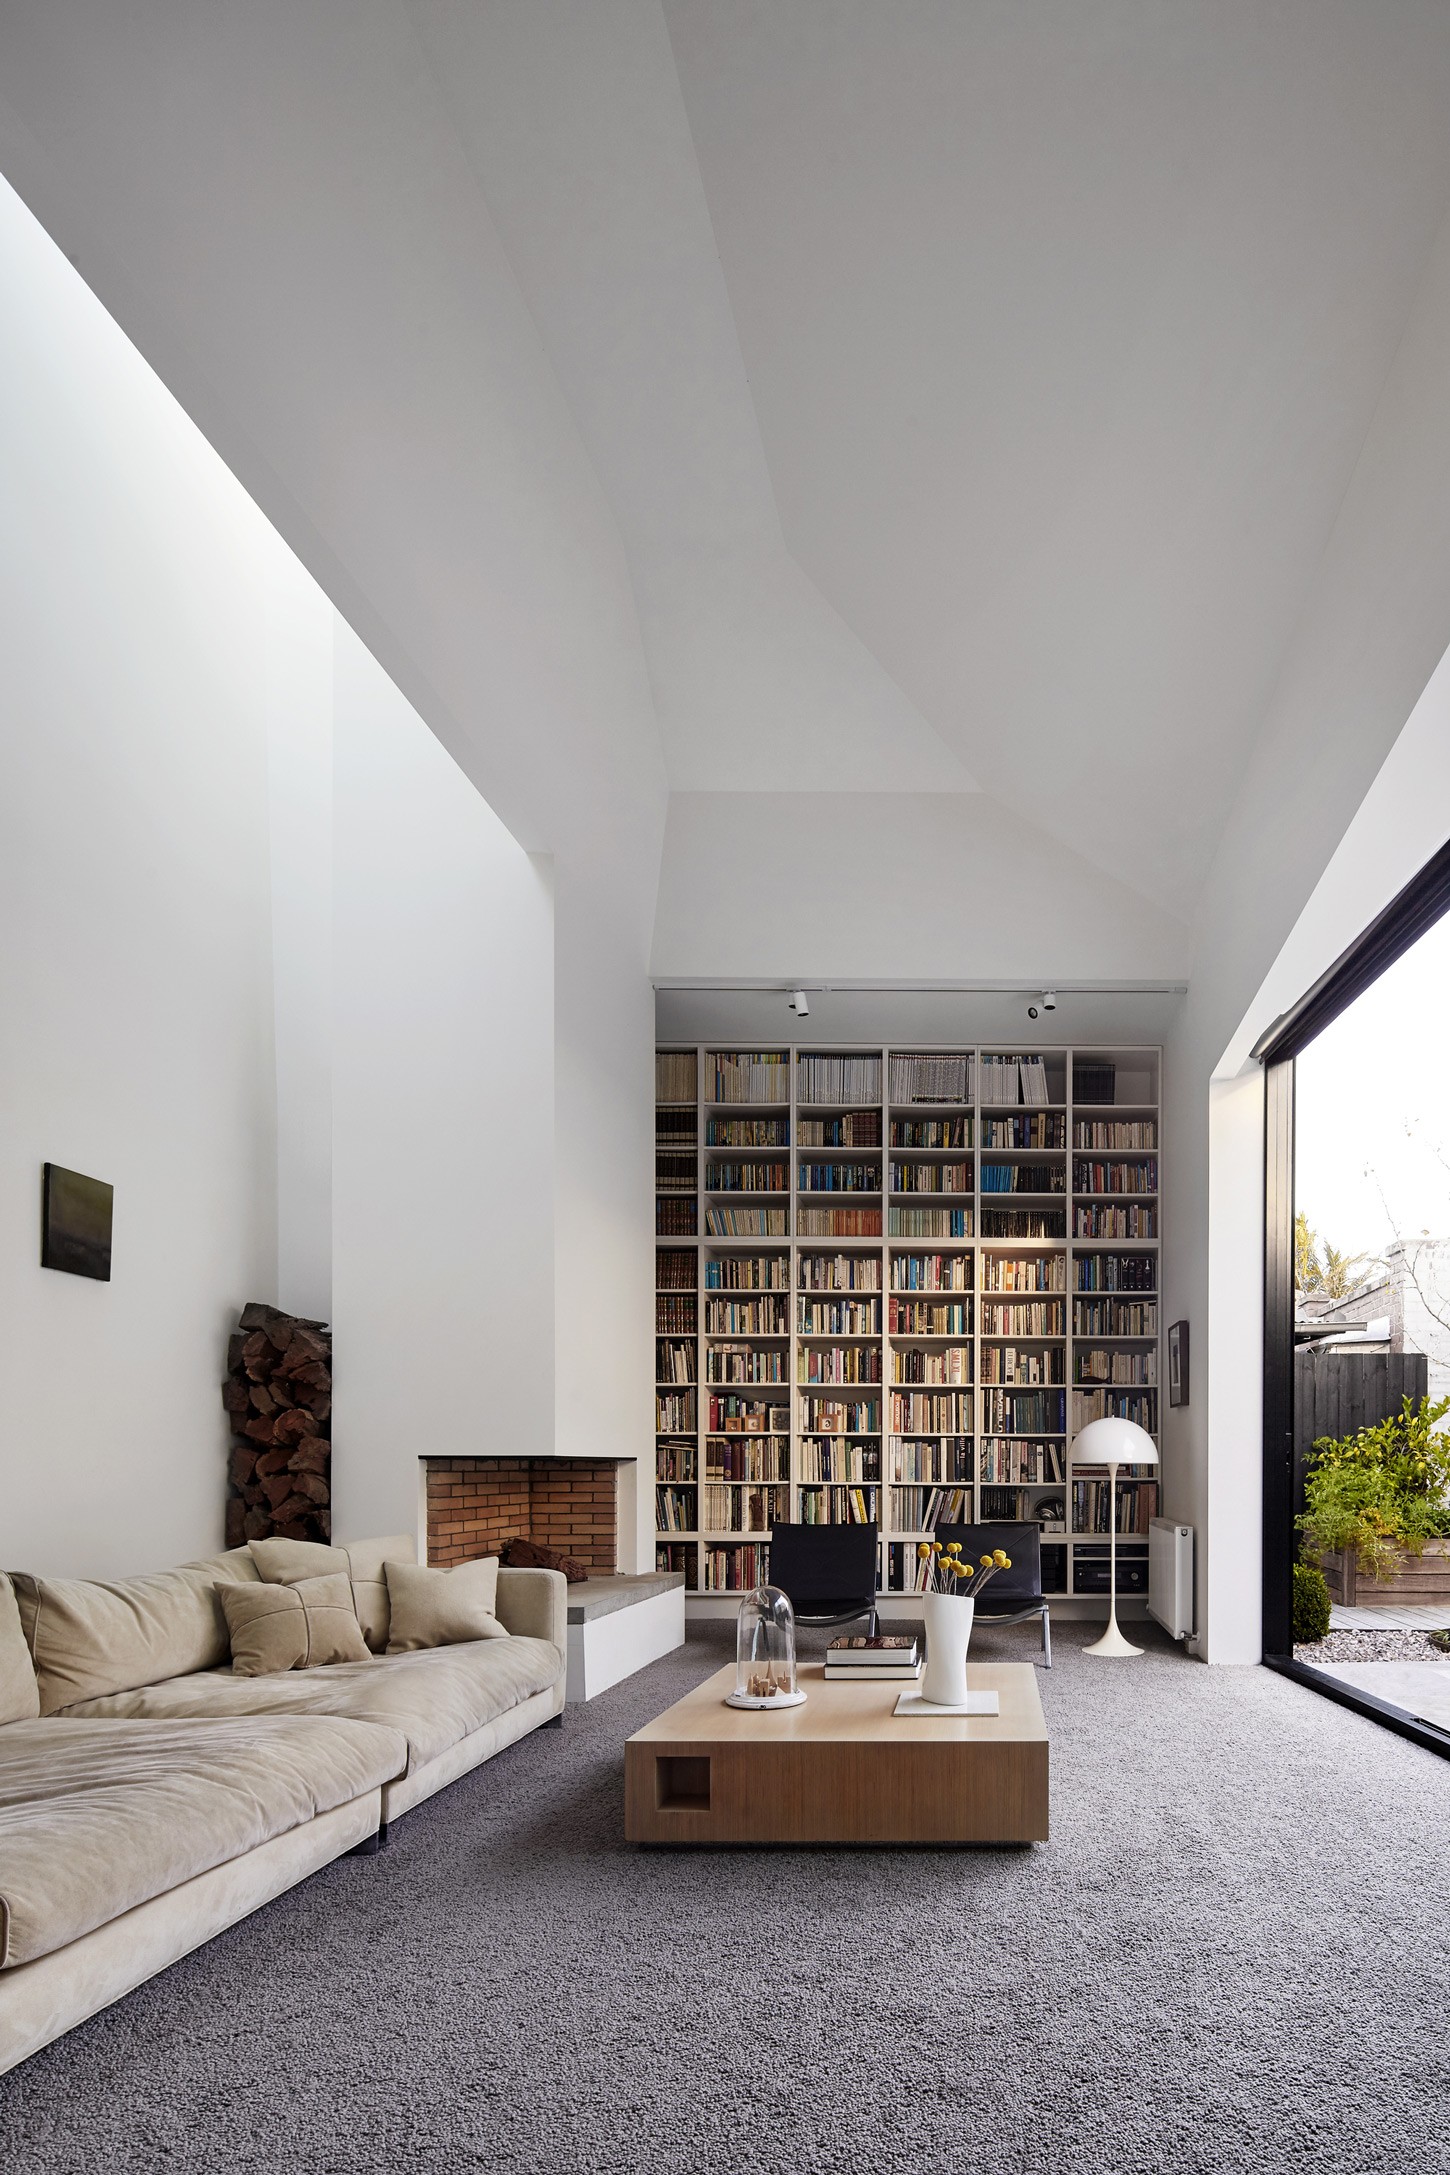 House 3 / Coy Yiontis Architects (18)